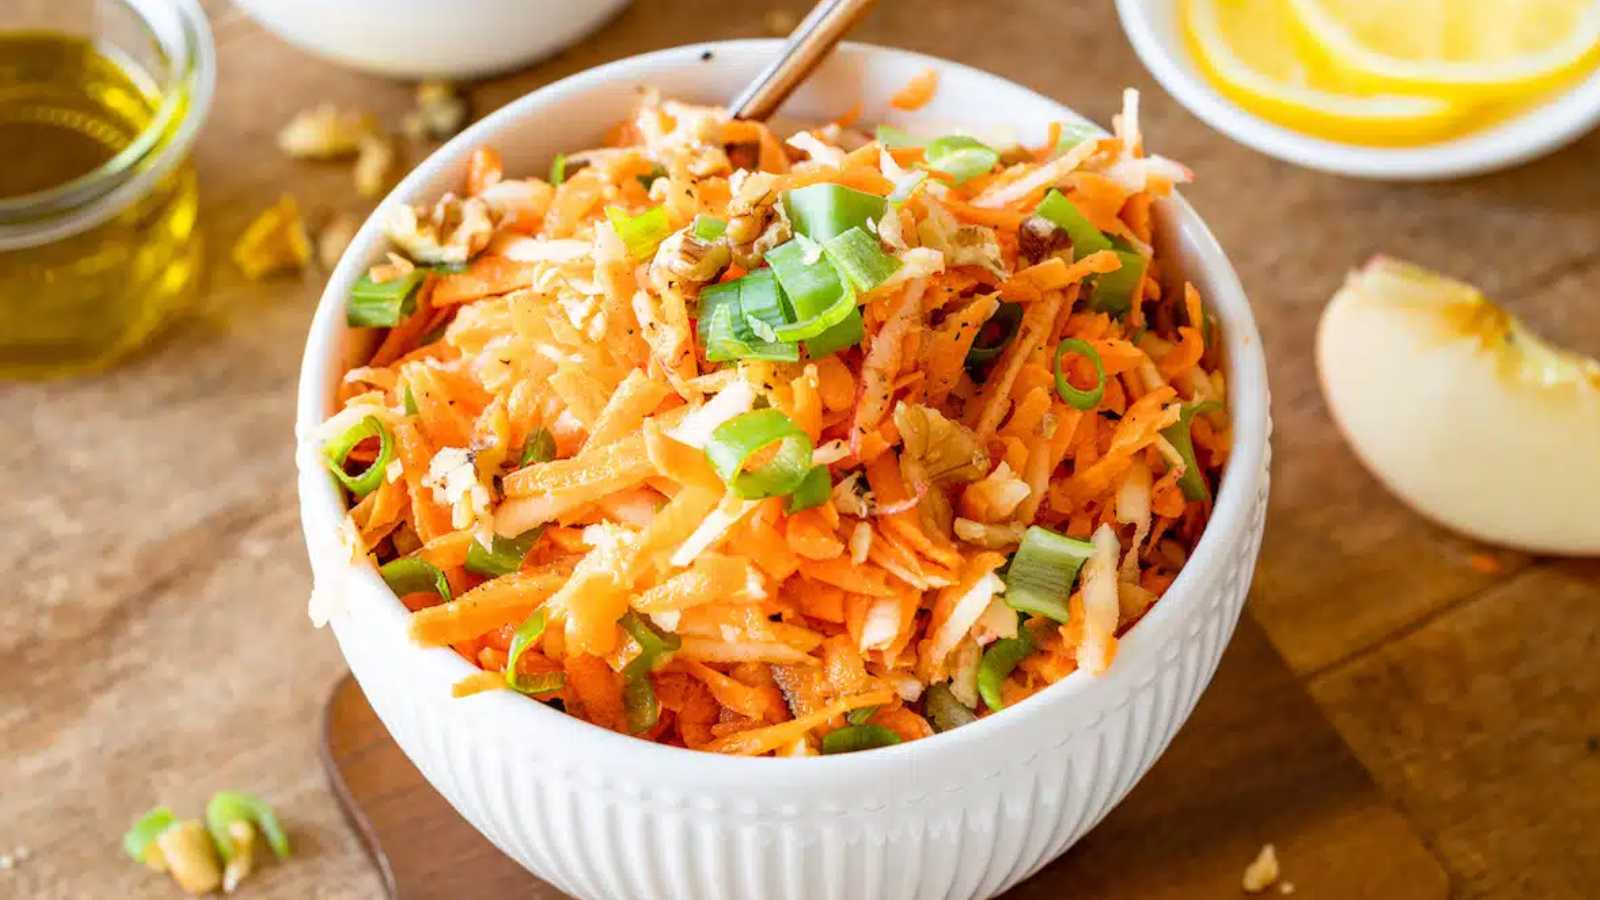 A mixed apple and carrot salad in a bowl.